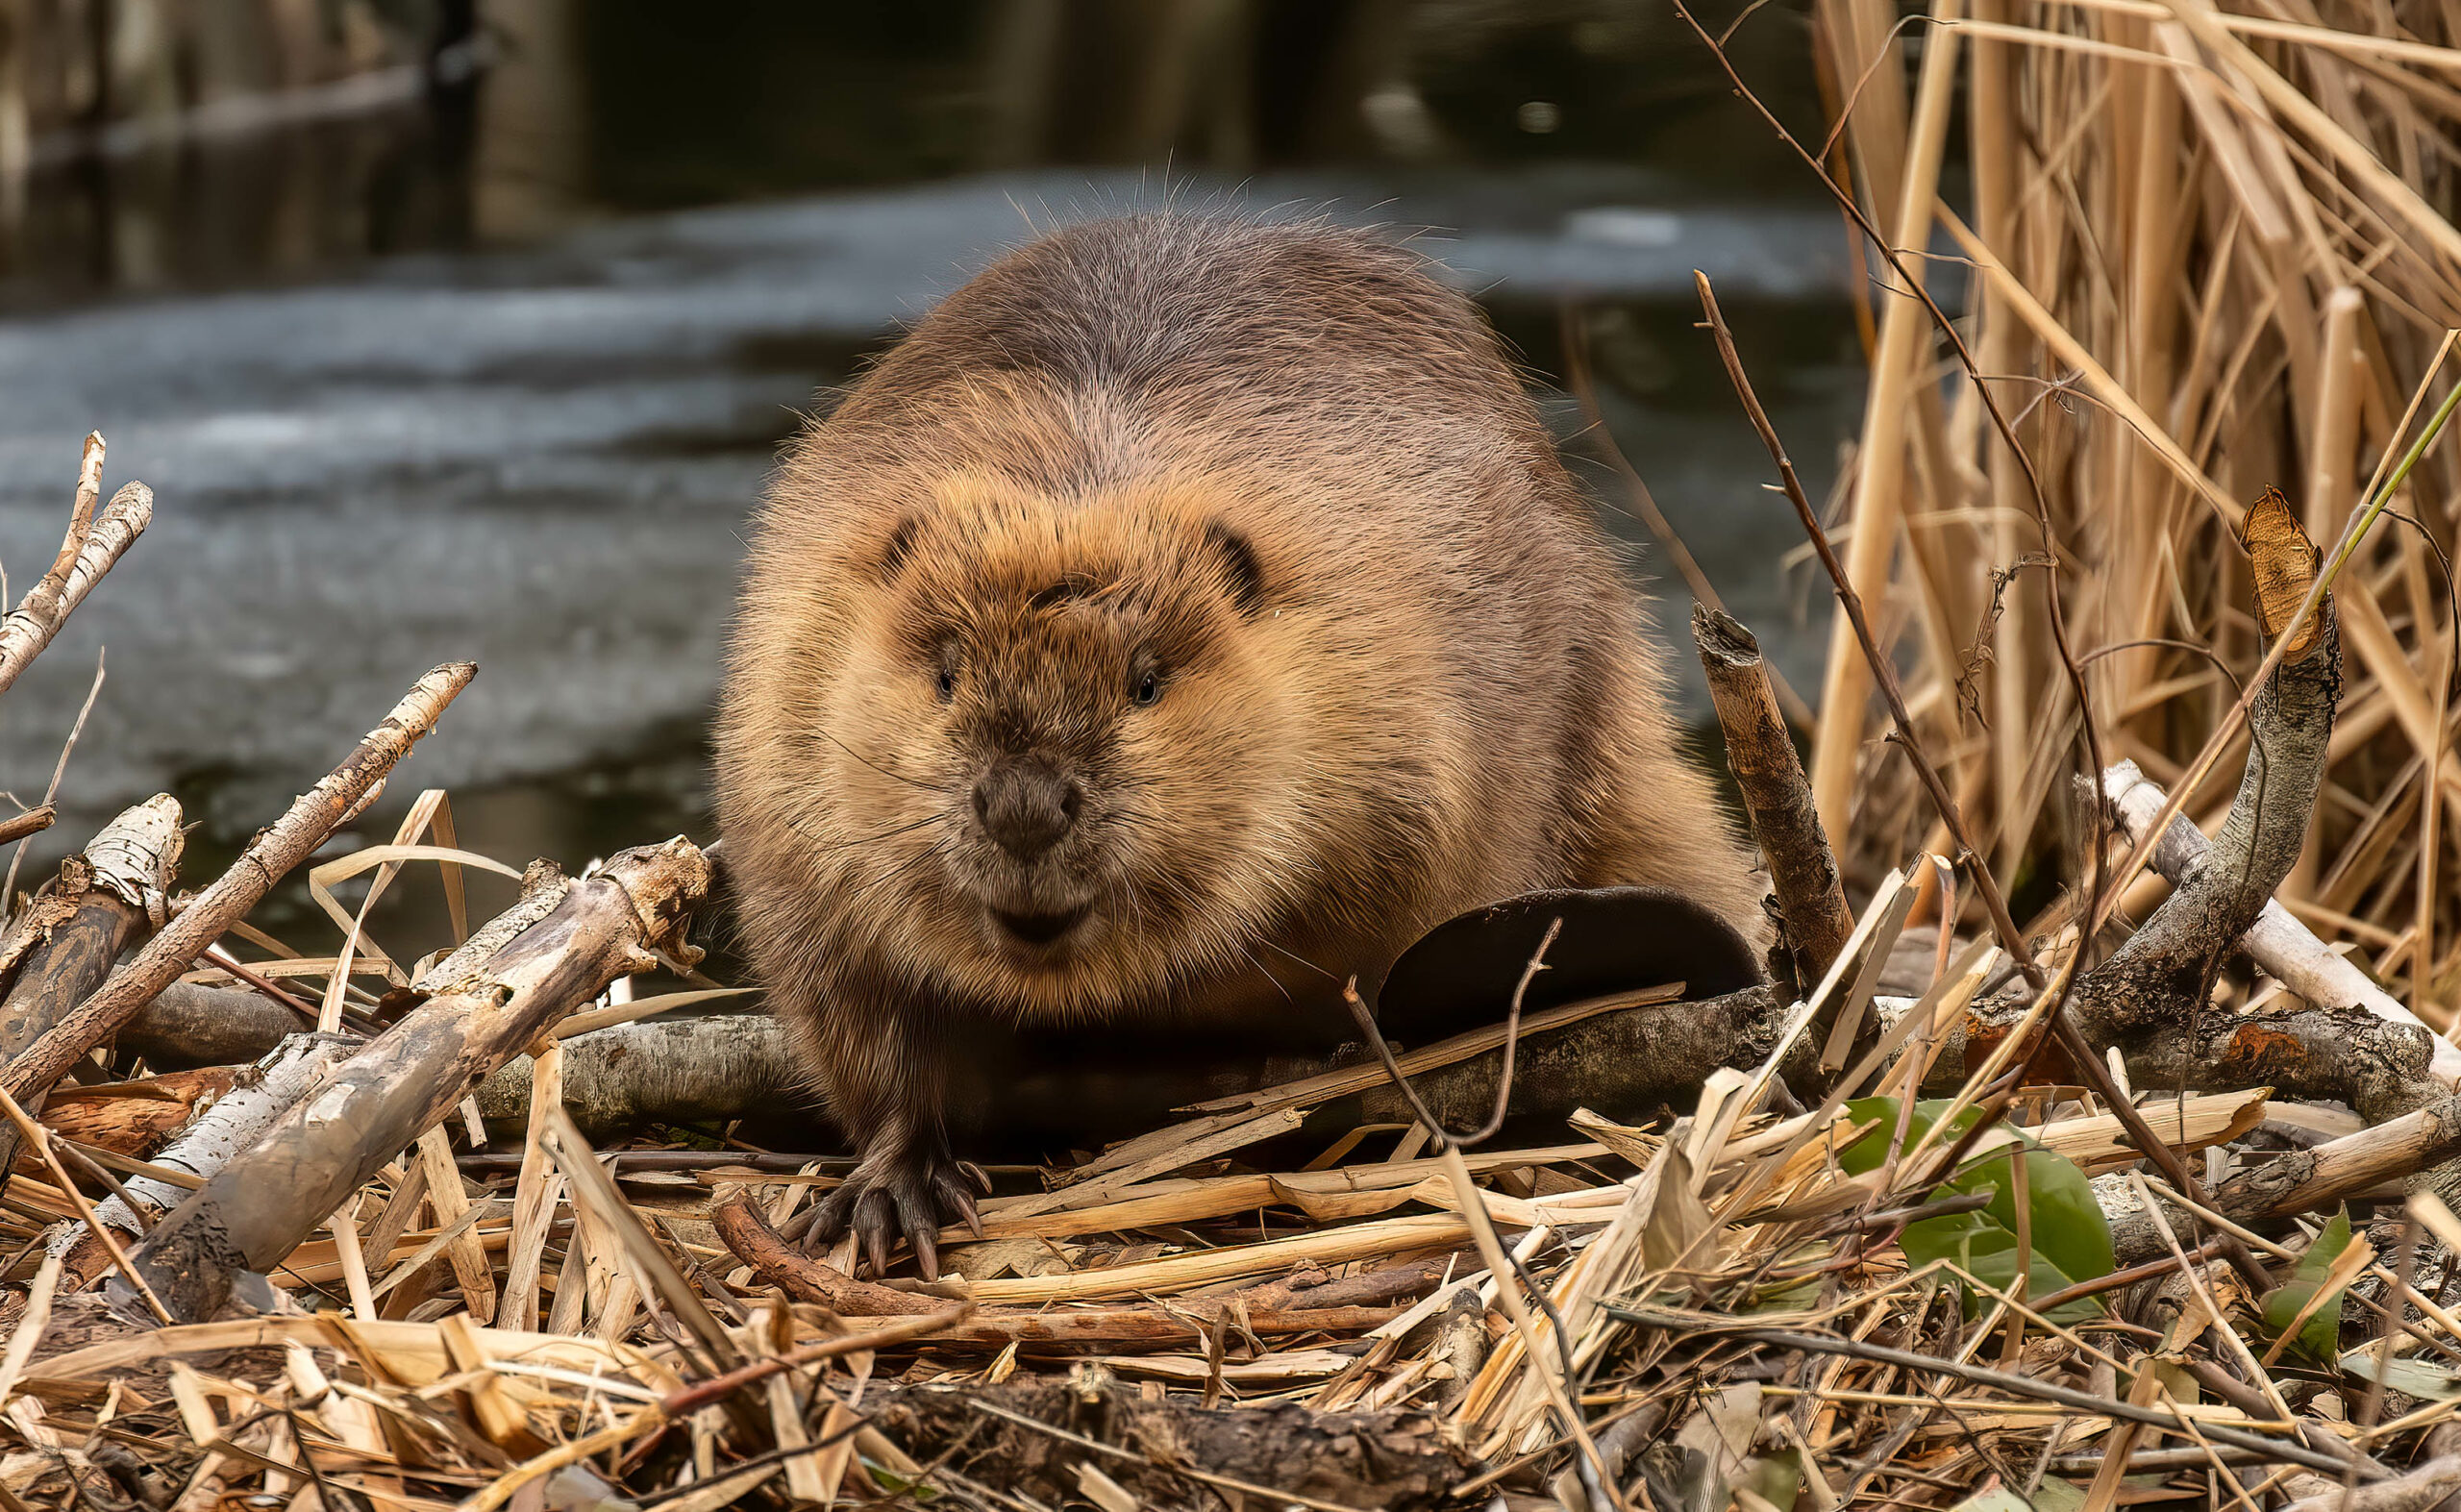 Beaver by a river staring at the camera 